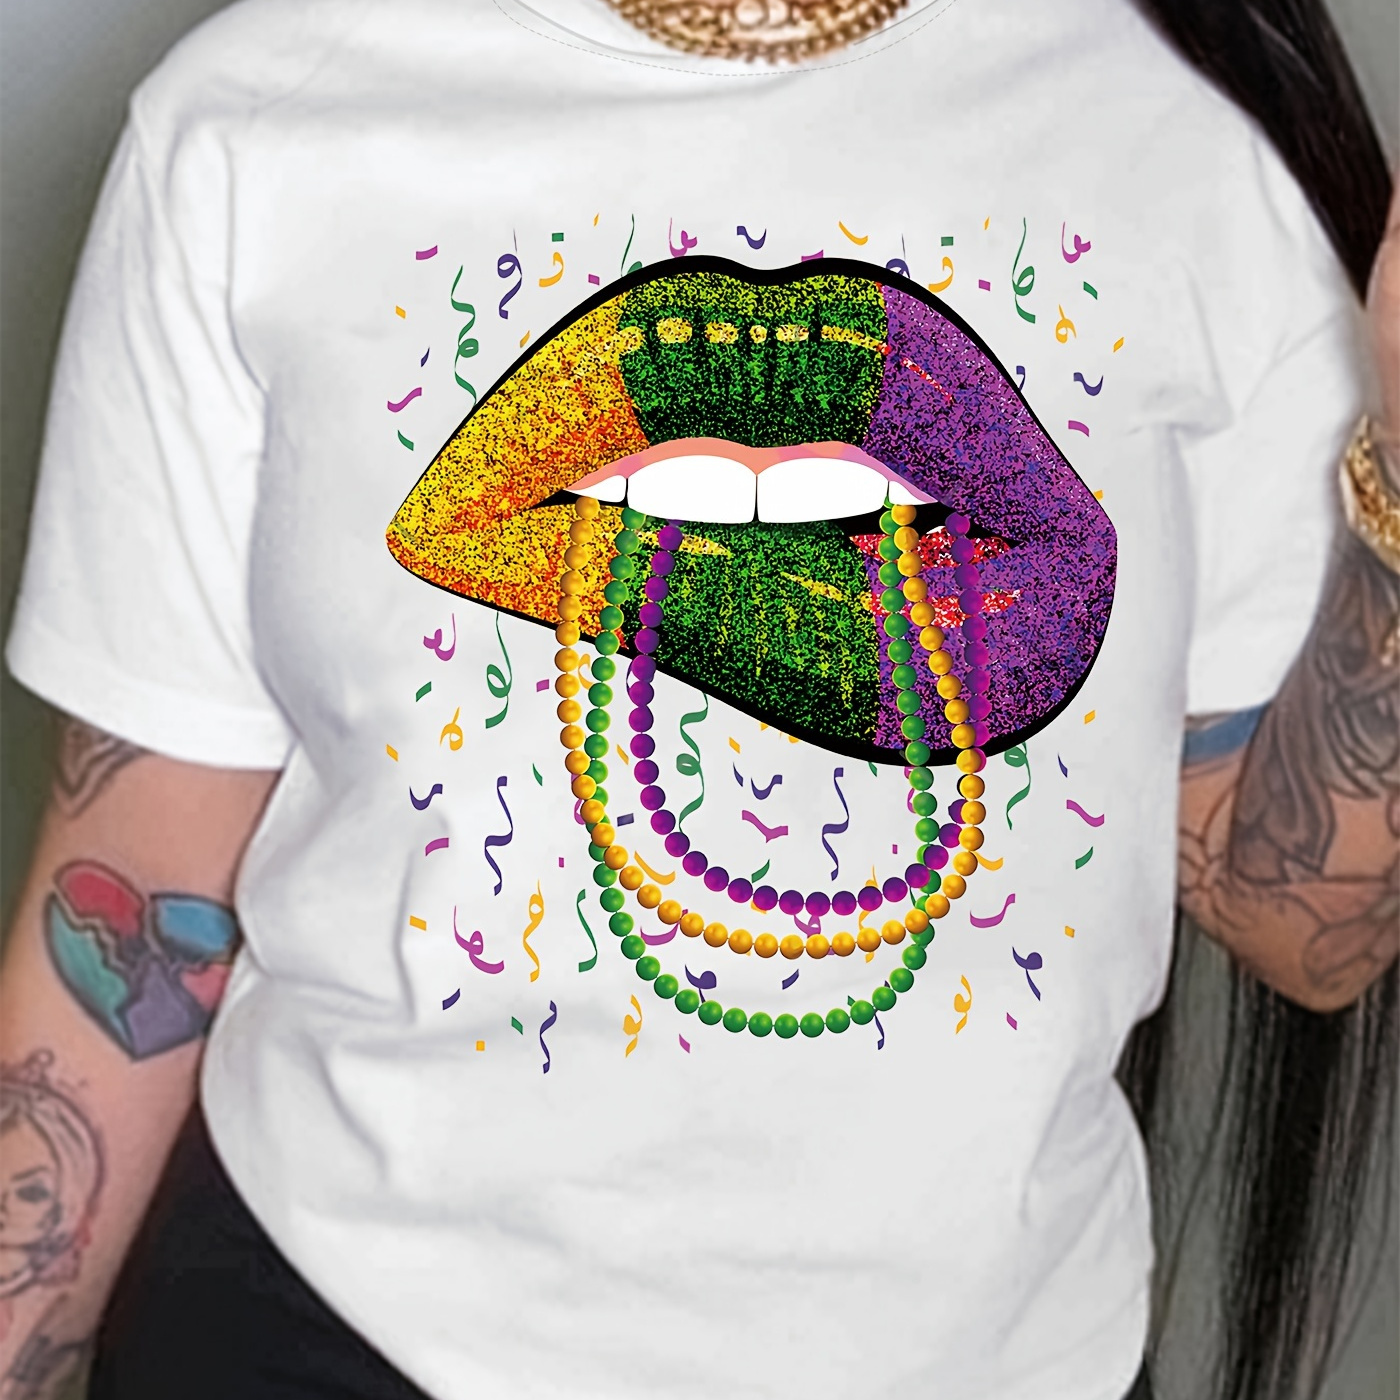 

Lips Print T-shirt, Short Sleeve Crew Neck Casual Top For Summer & Spring, Women's Clothing